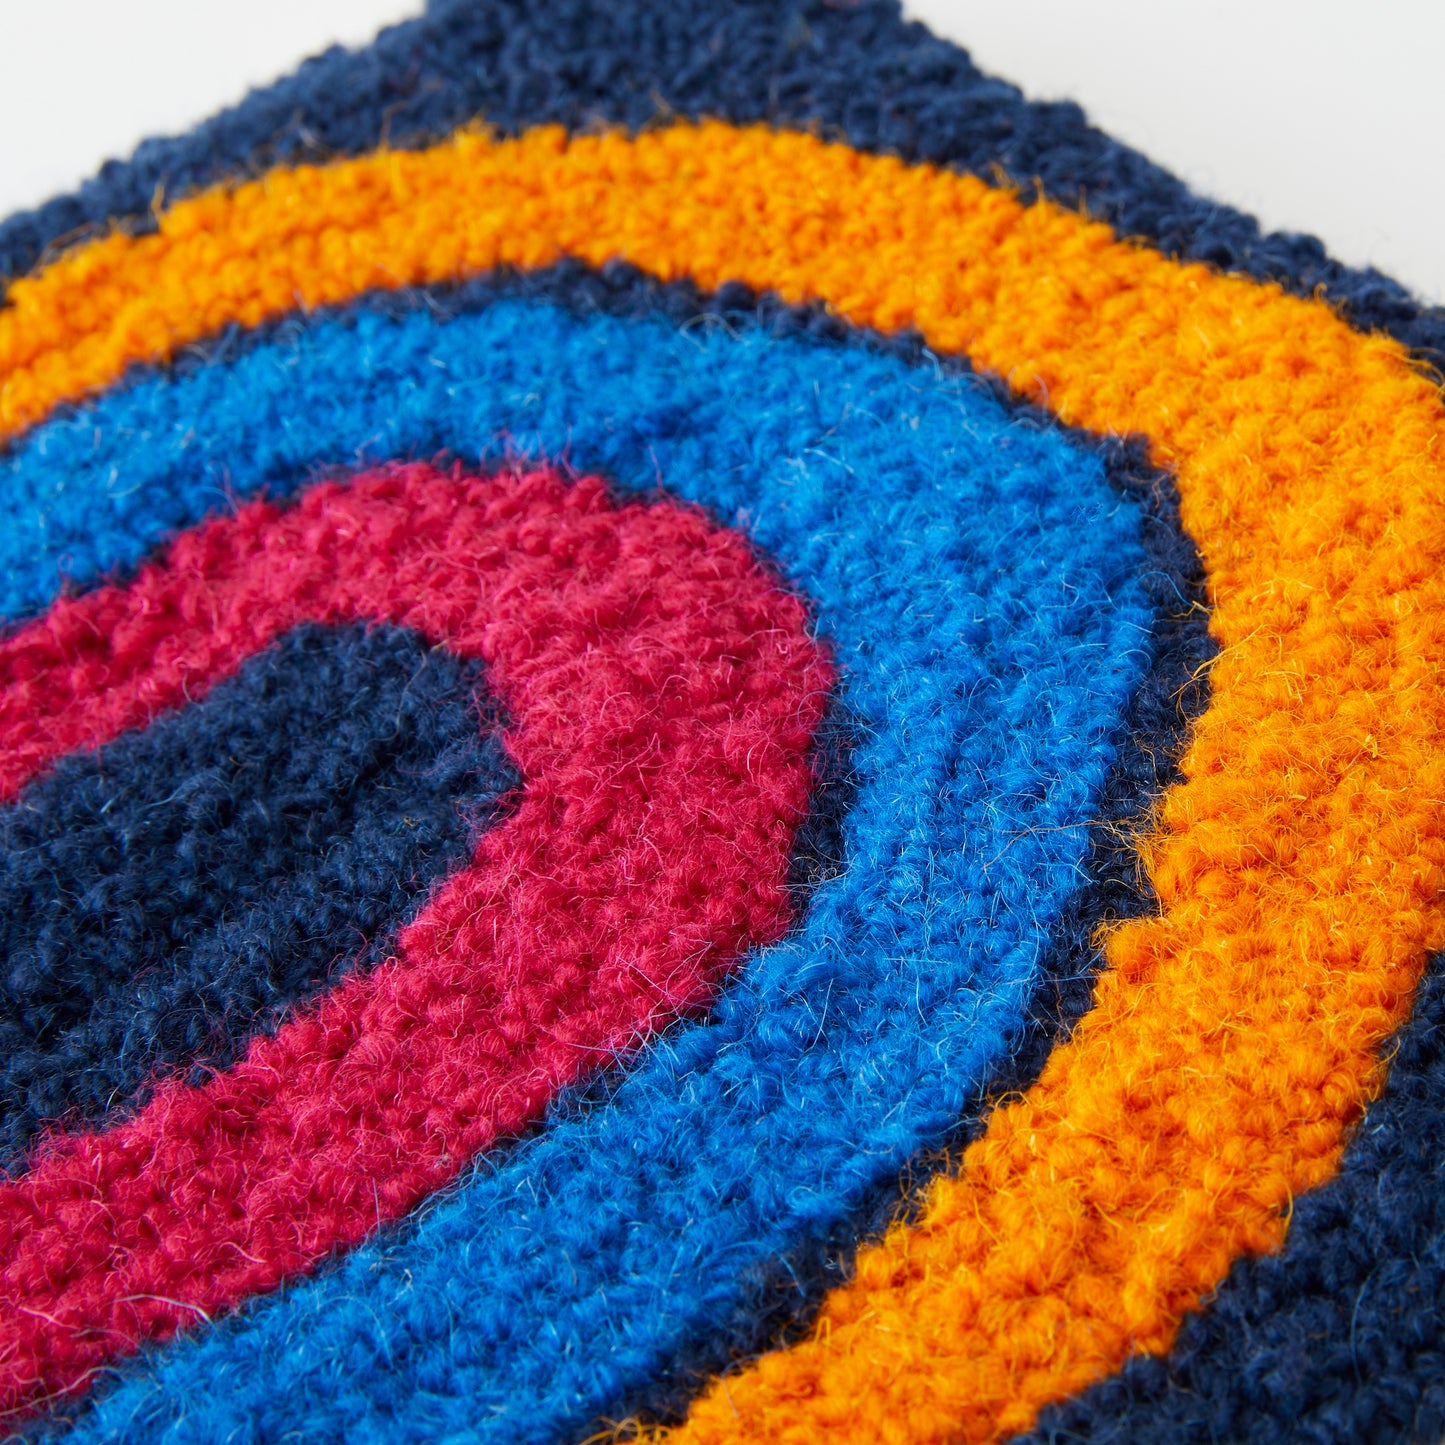 A loop pile tufted wall hanging in navy, orange, royal blue and magenta. This rainbow design has playful ‘illustrated’ edges close up.